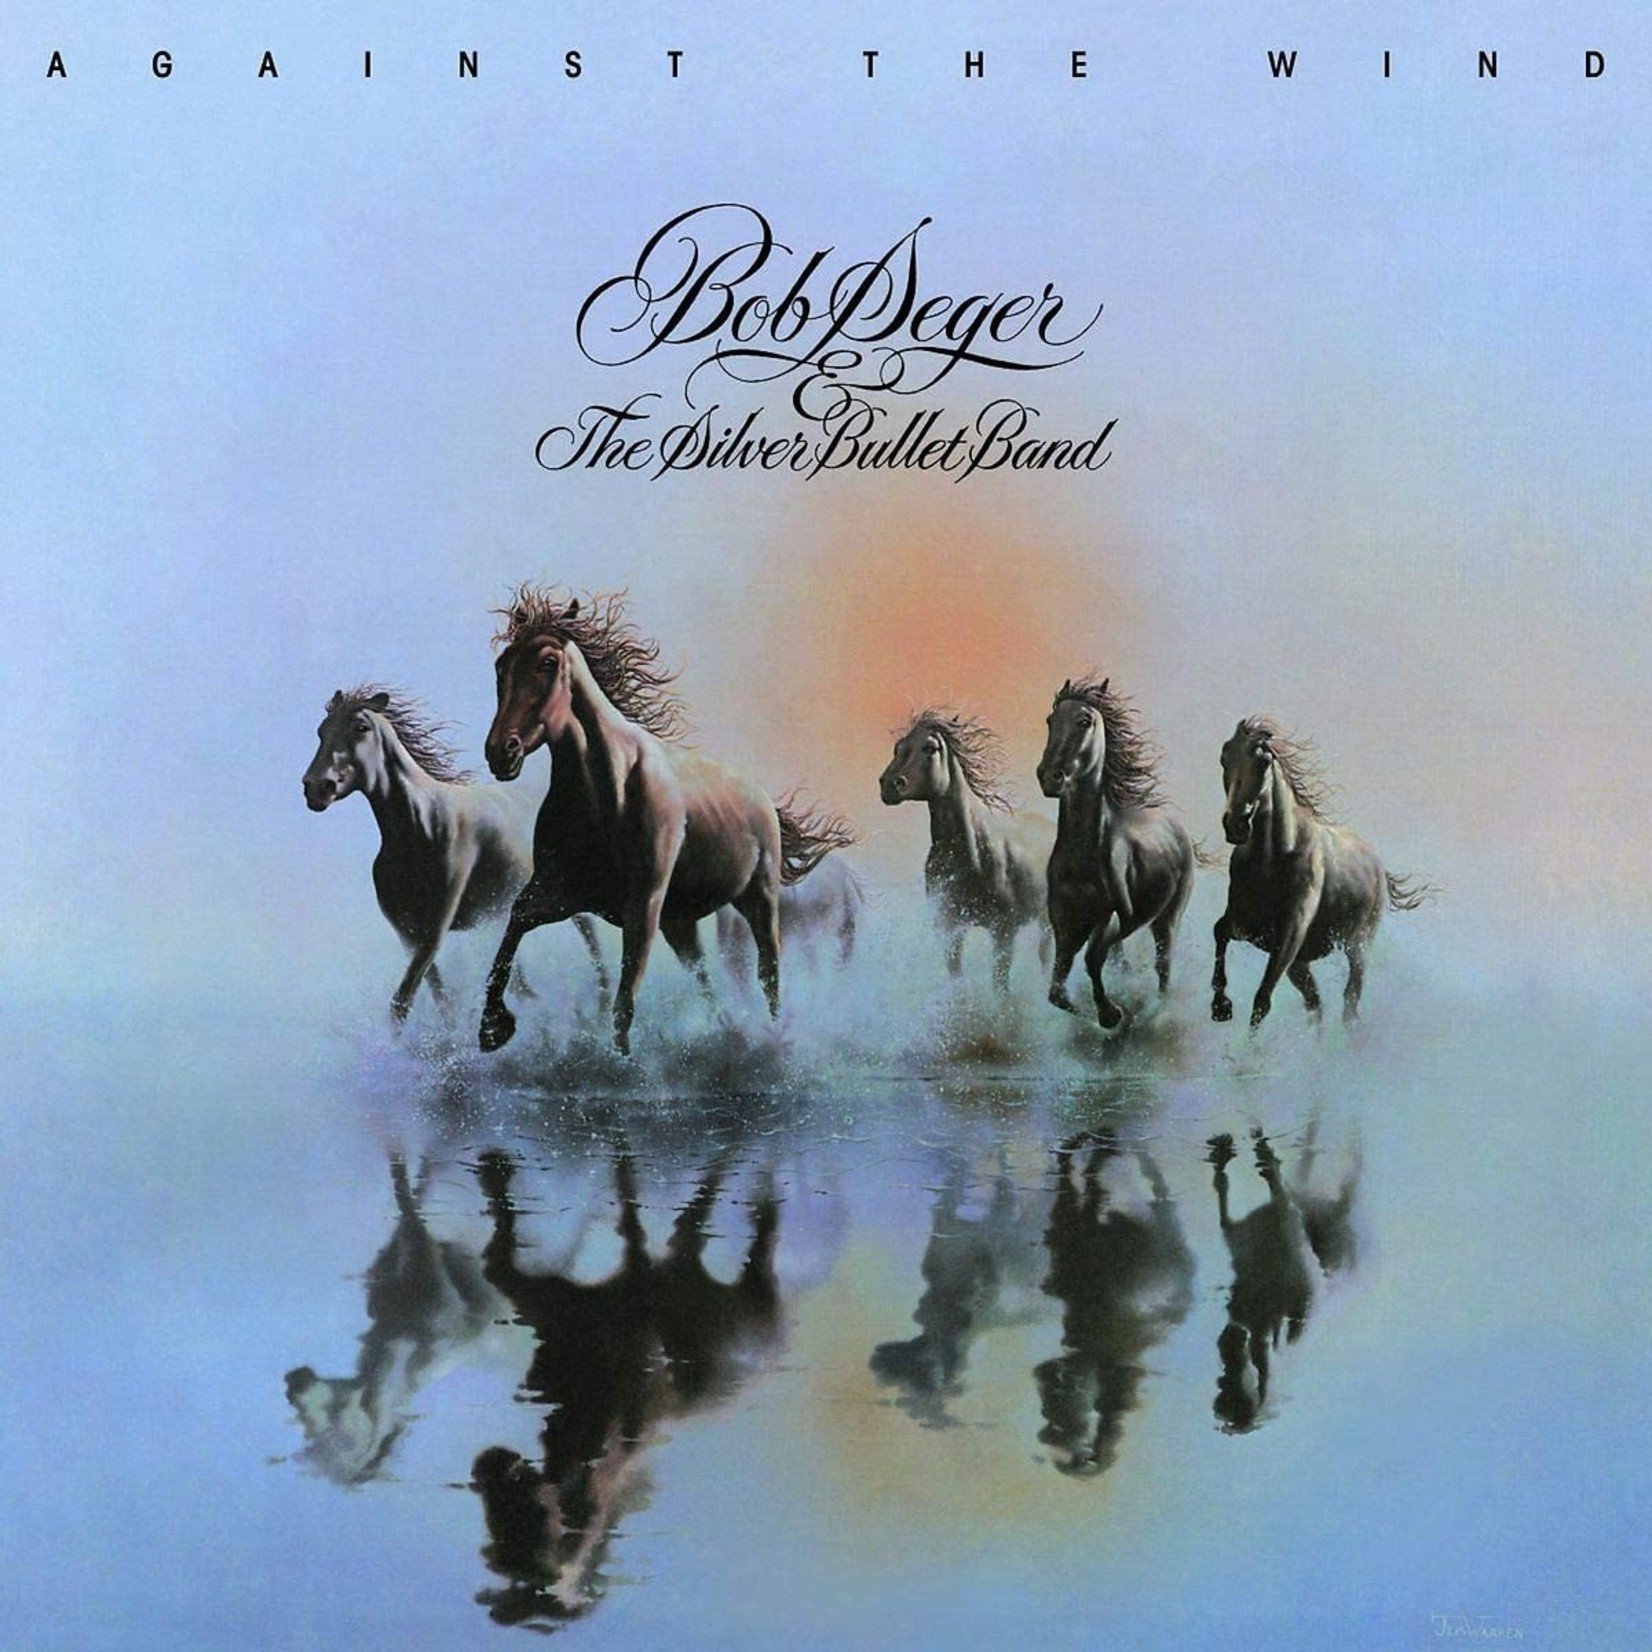 BOB SEGER & THE SILVER BULLET BAND AGAINST THE WIND  LP